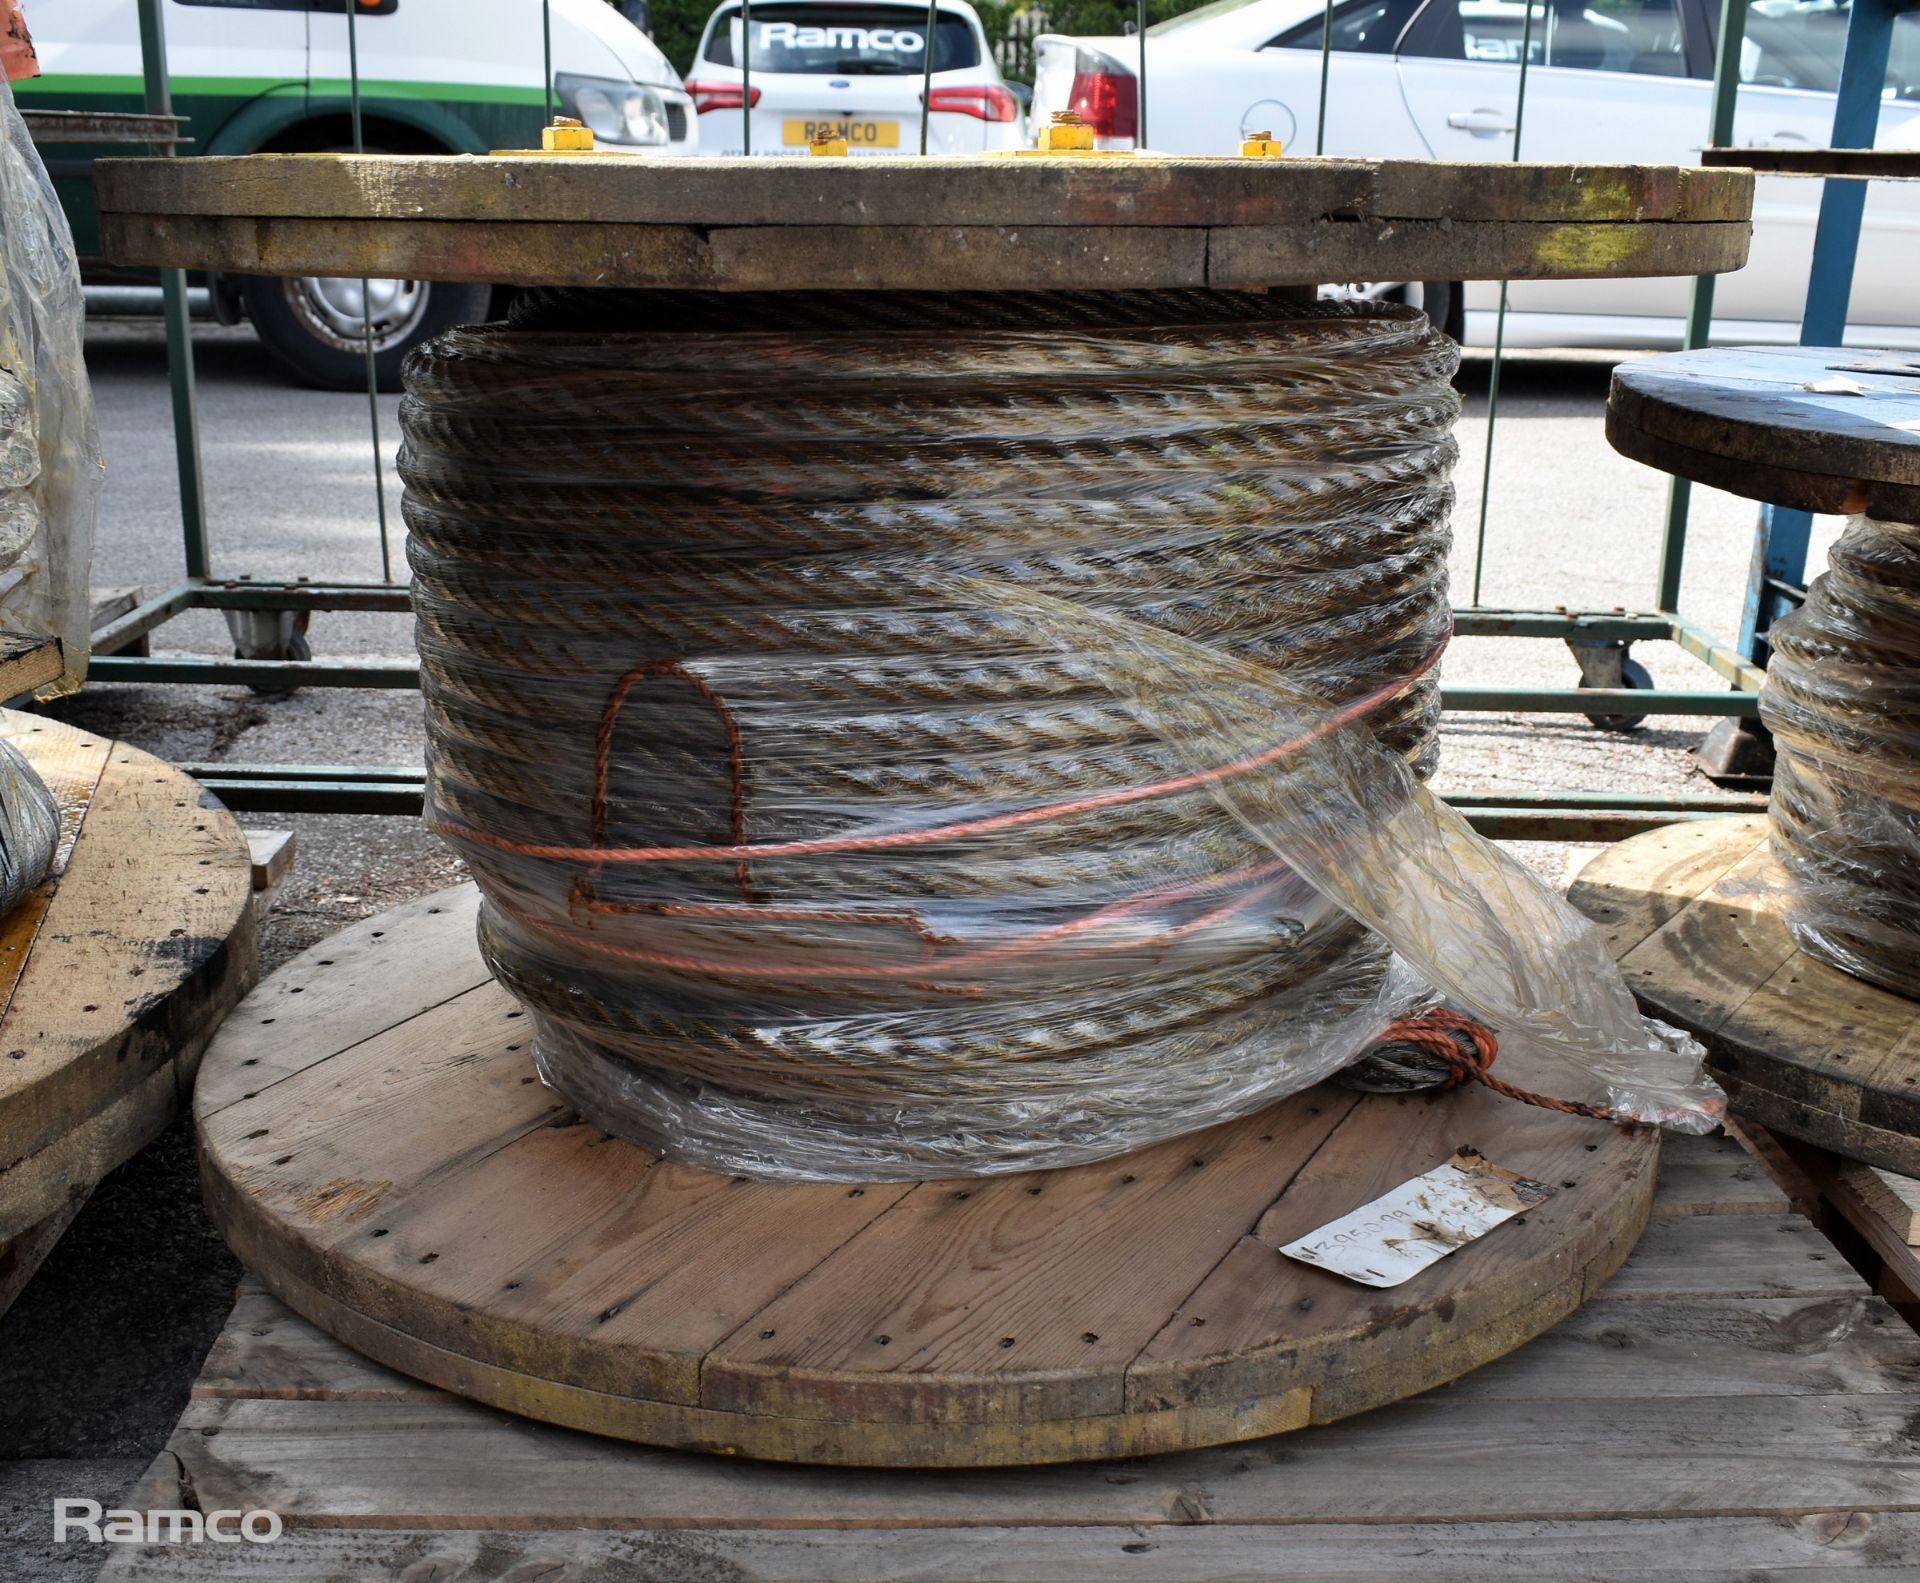 24mm 6 strand galvanised steel wire rope reel - approx weight: 300kg - Image 2 of 4